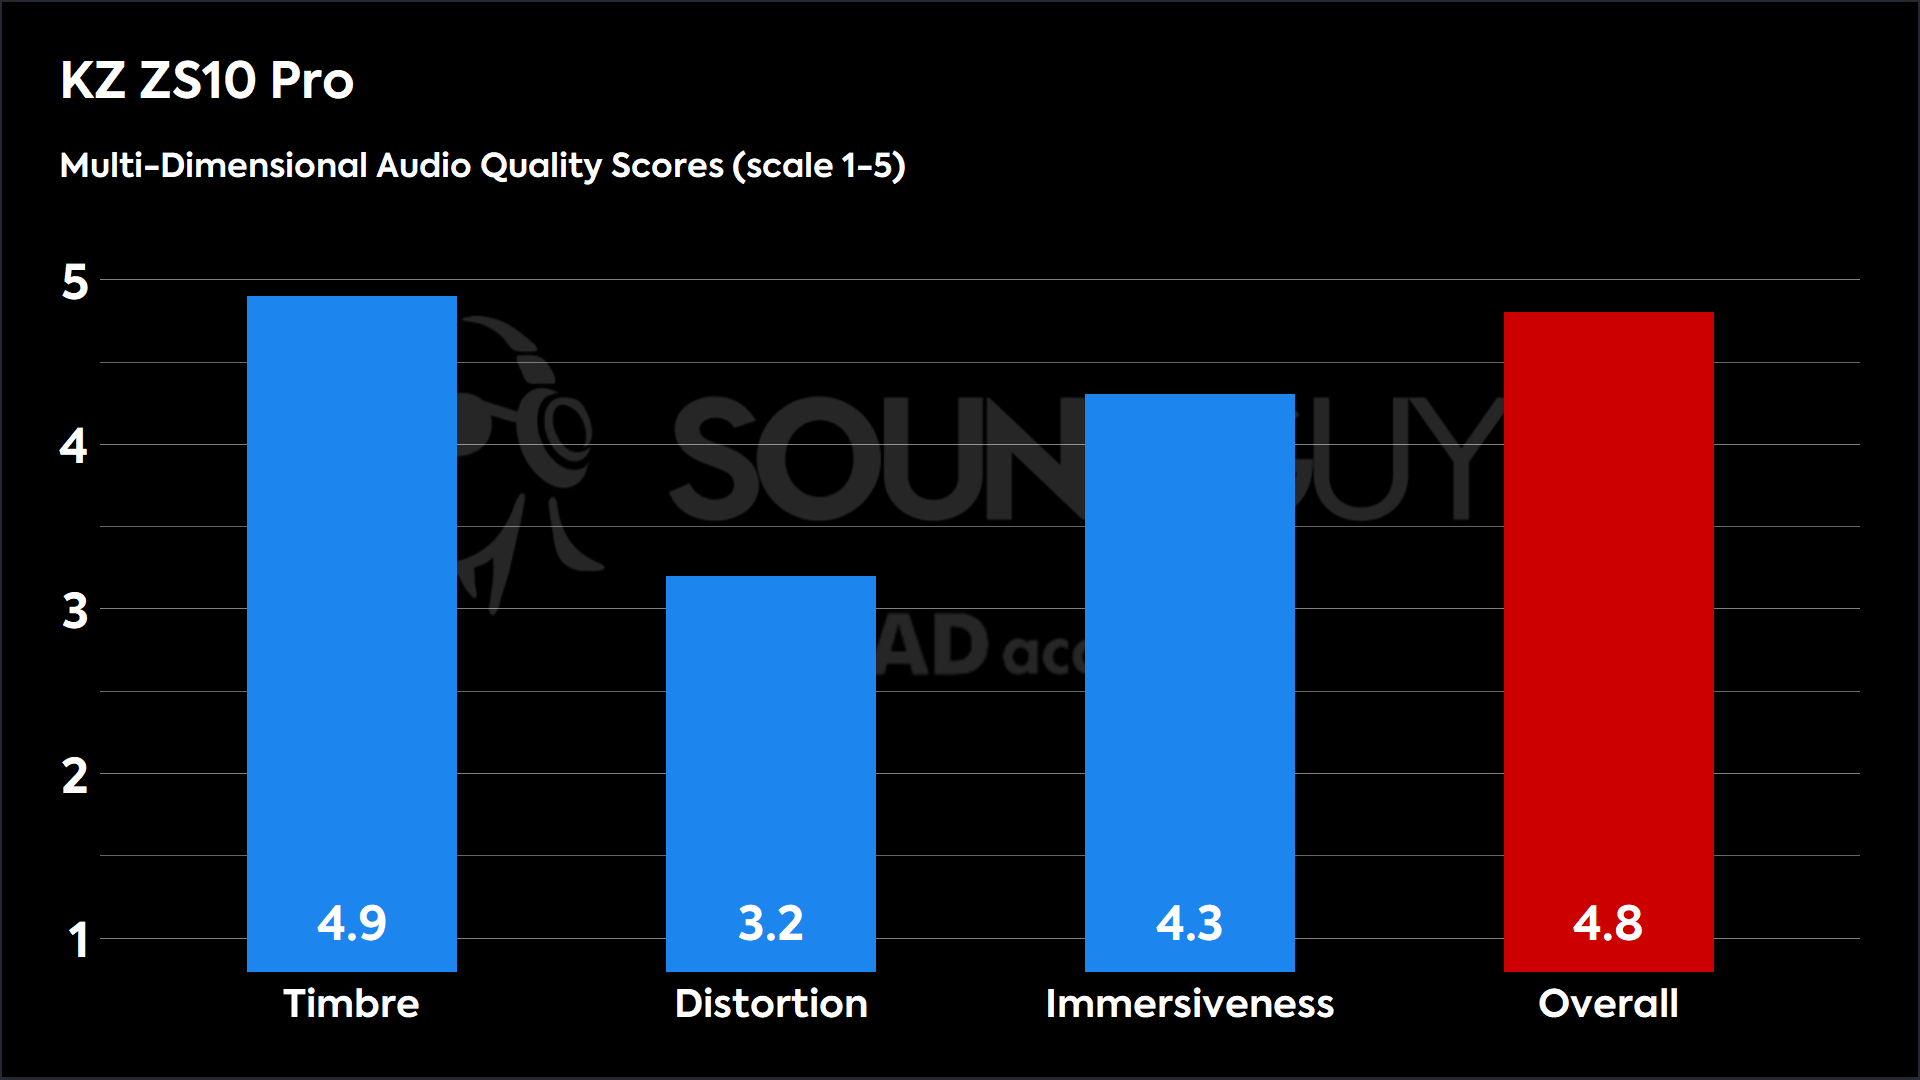 This chart shows the MDAQS results for the KZ ZS10 Pro in Default mode. The Timbre score is 4.9, The Distortion score is 3.2, the Immersiveness score is 4.3, and the Overall Score is 4.8).